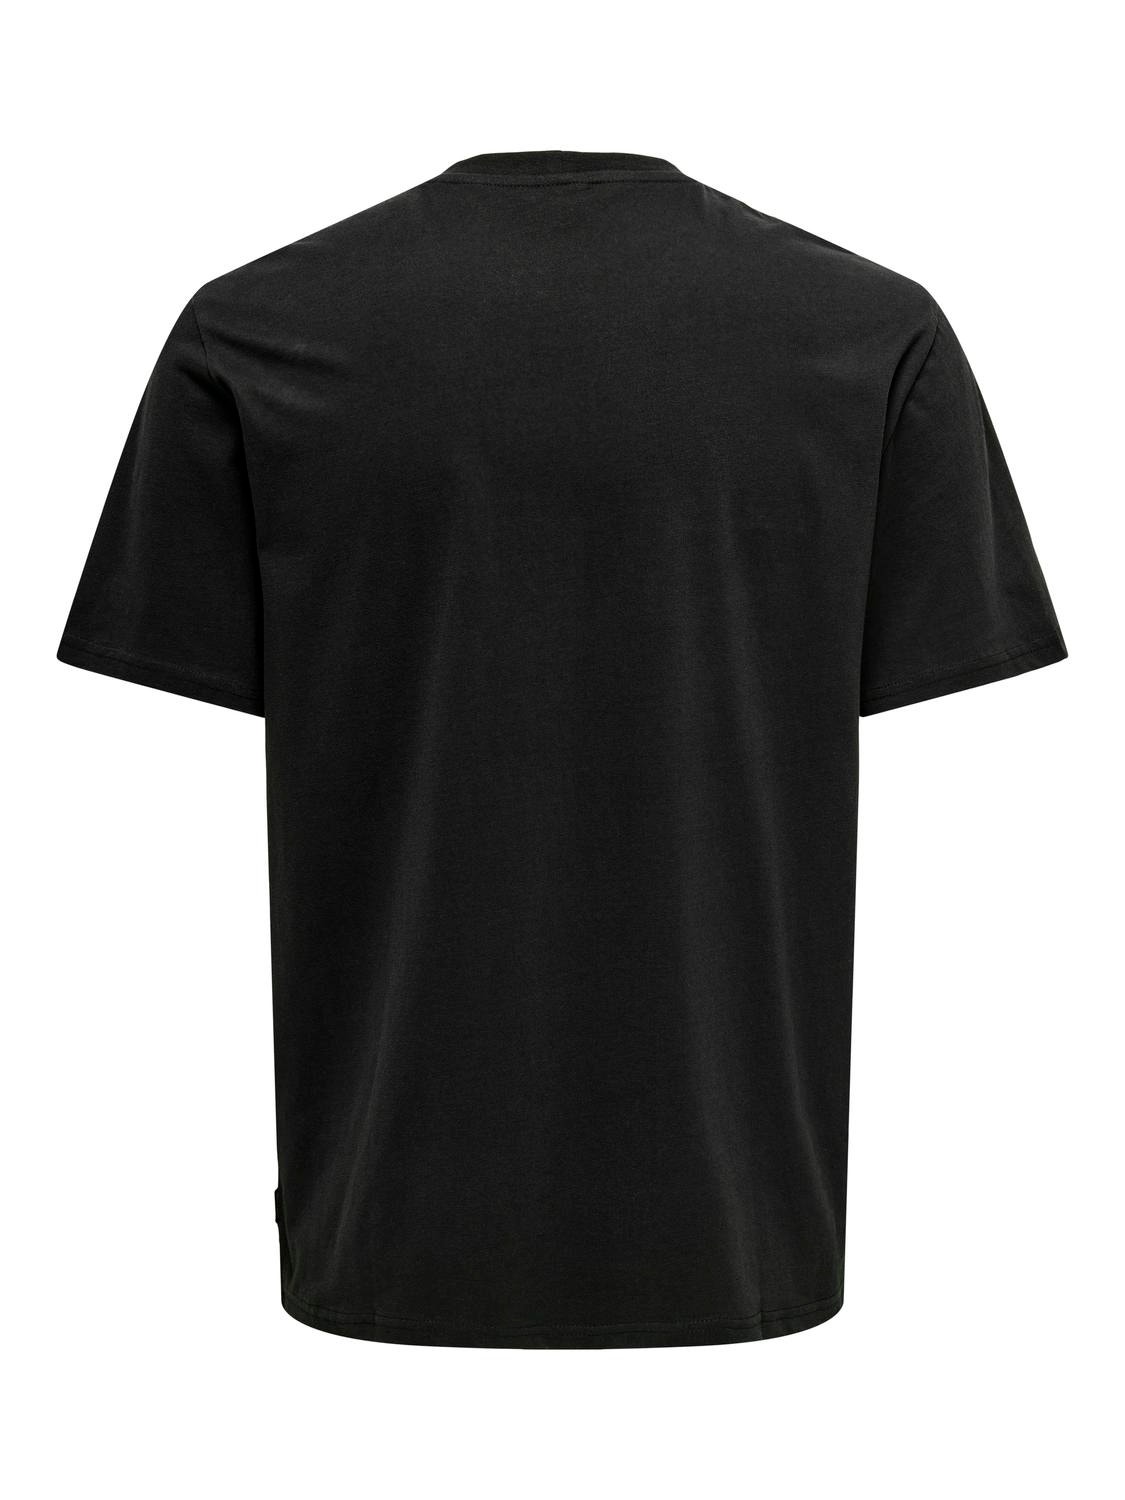 ONLY & SONS Regular Fit Round Neck T-Shirt -Black - 22028752